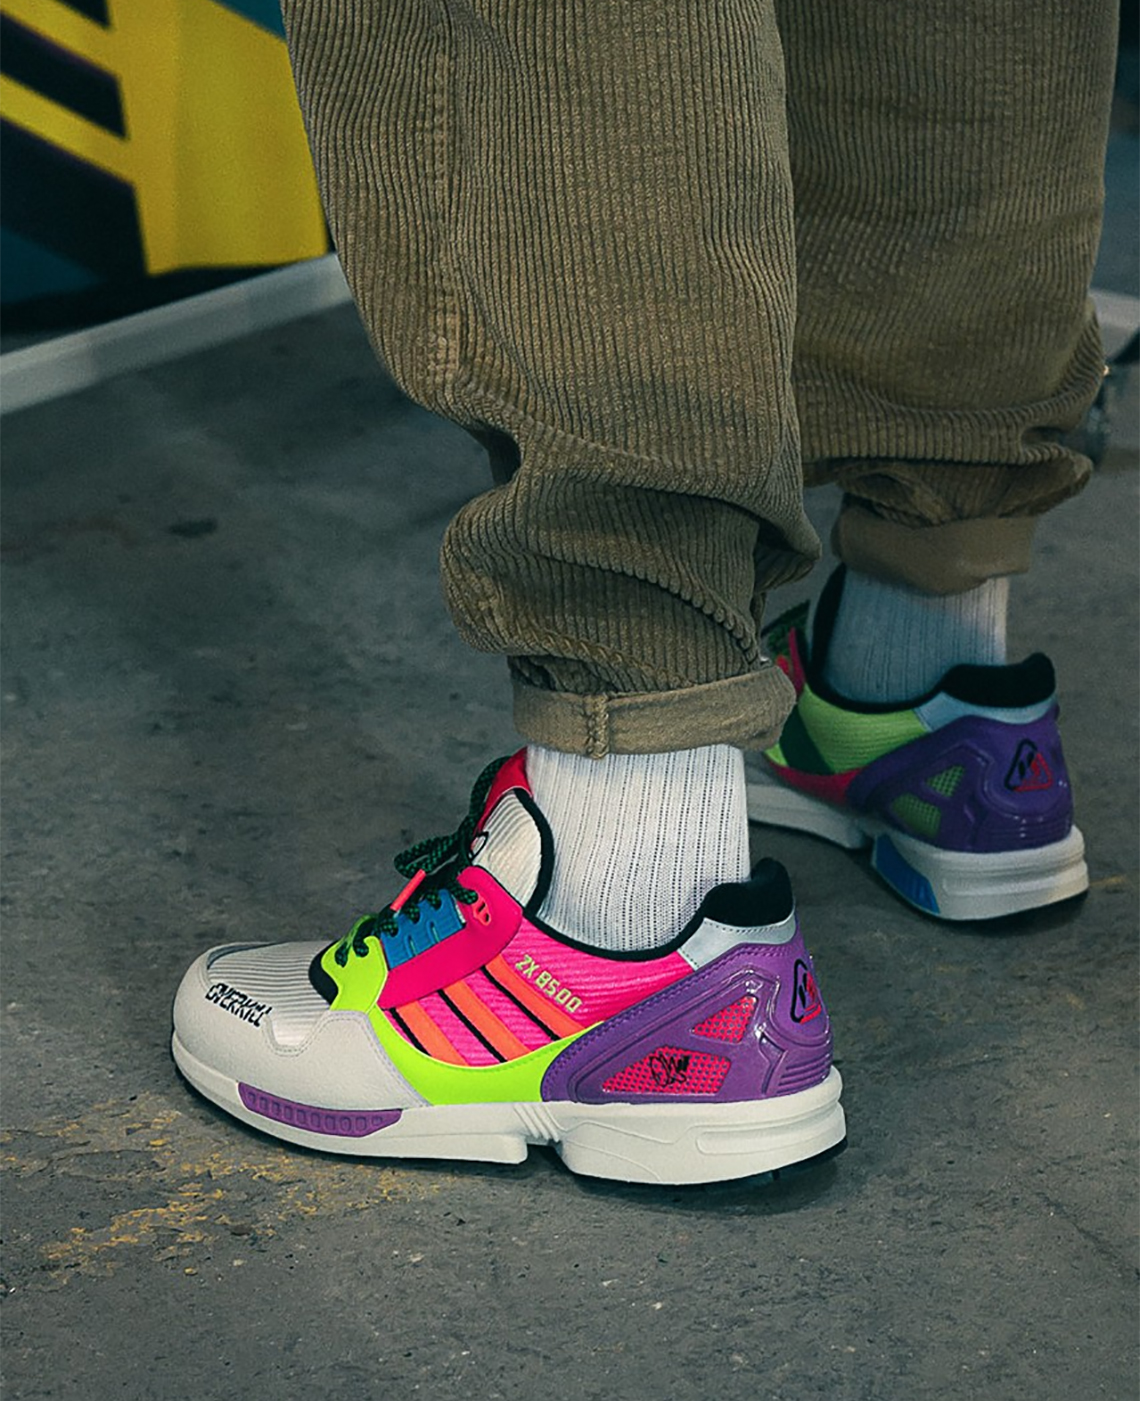 Overkill adidas ZX 8500 A-ZX Crystal White GY7642 | SneakerNews.com